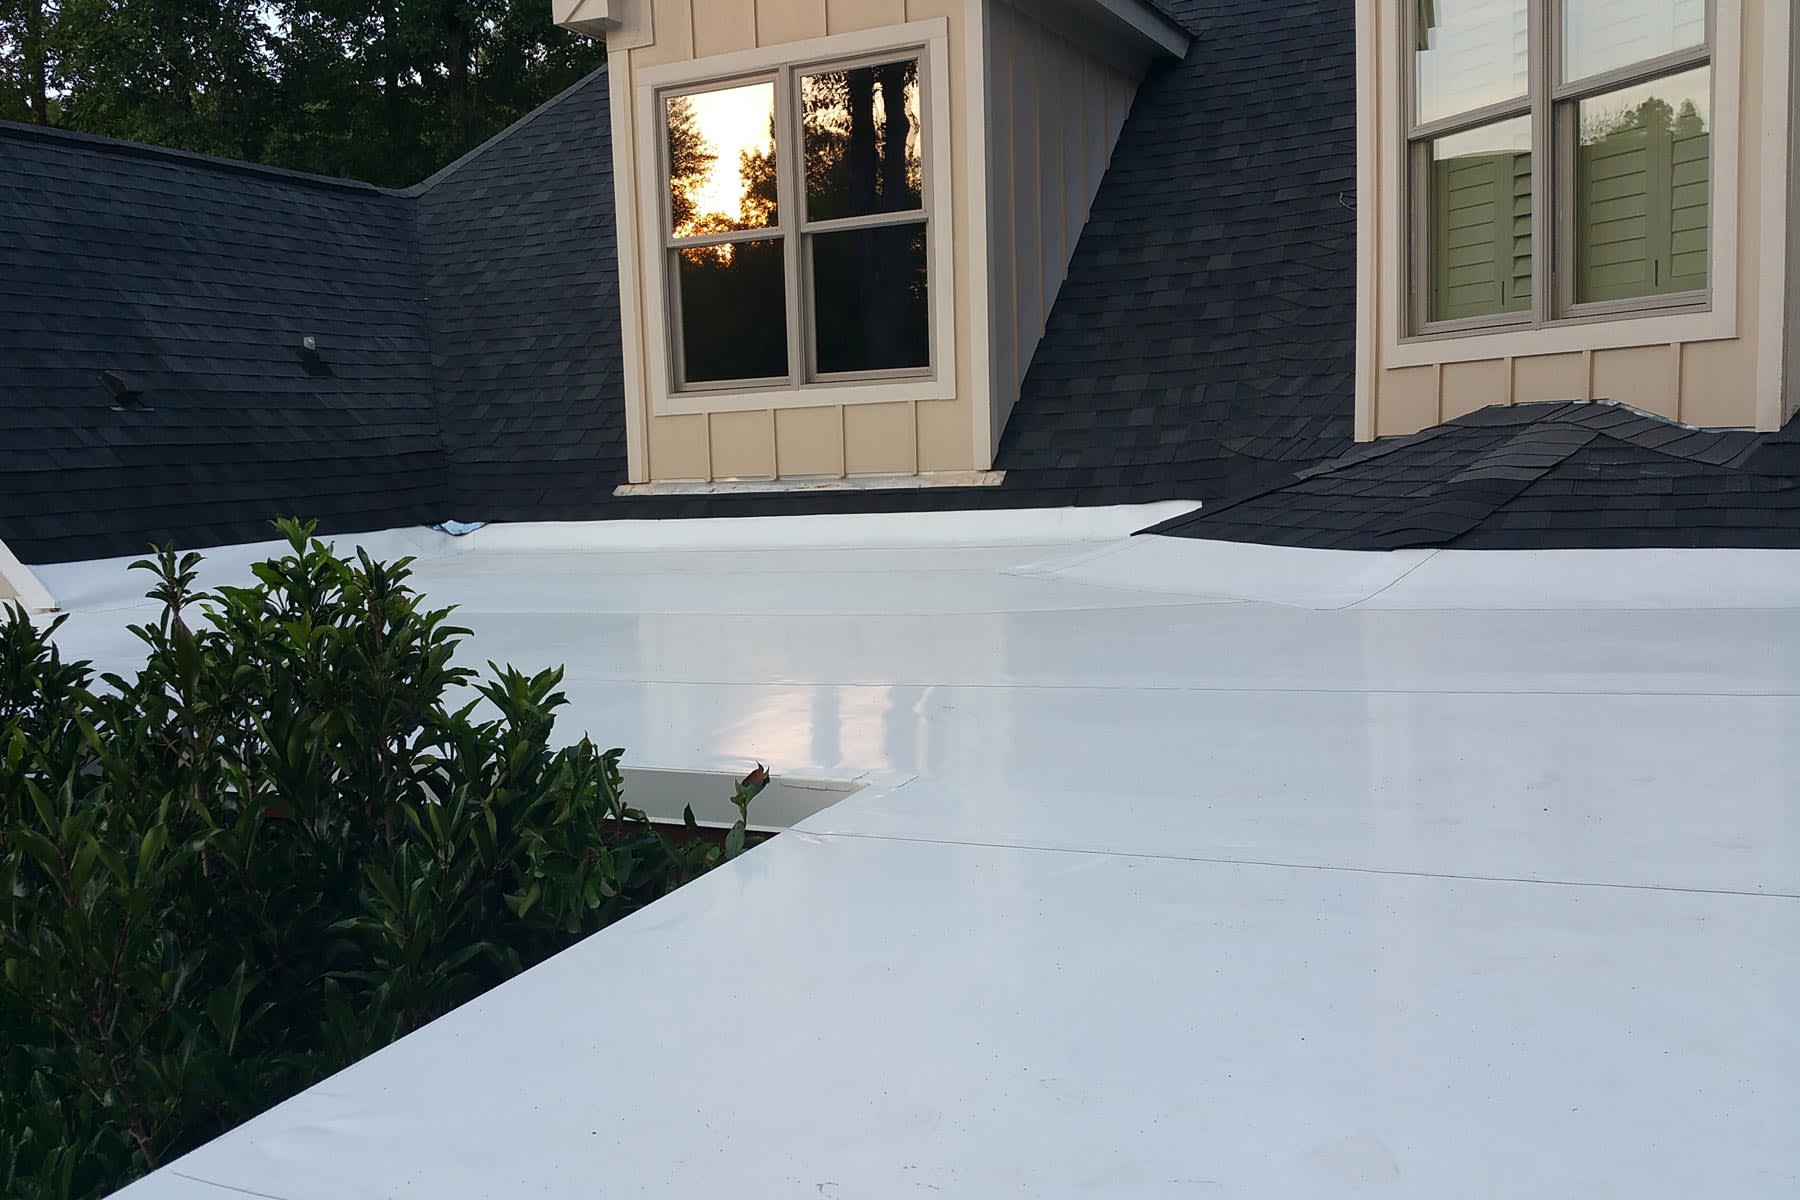 How much does TPO roofing cost?